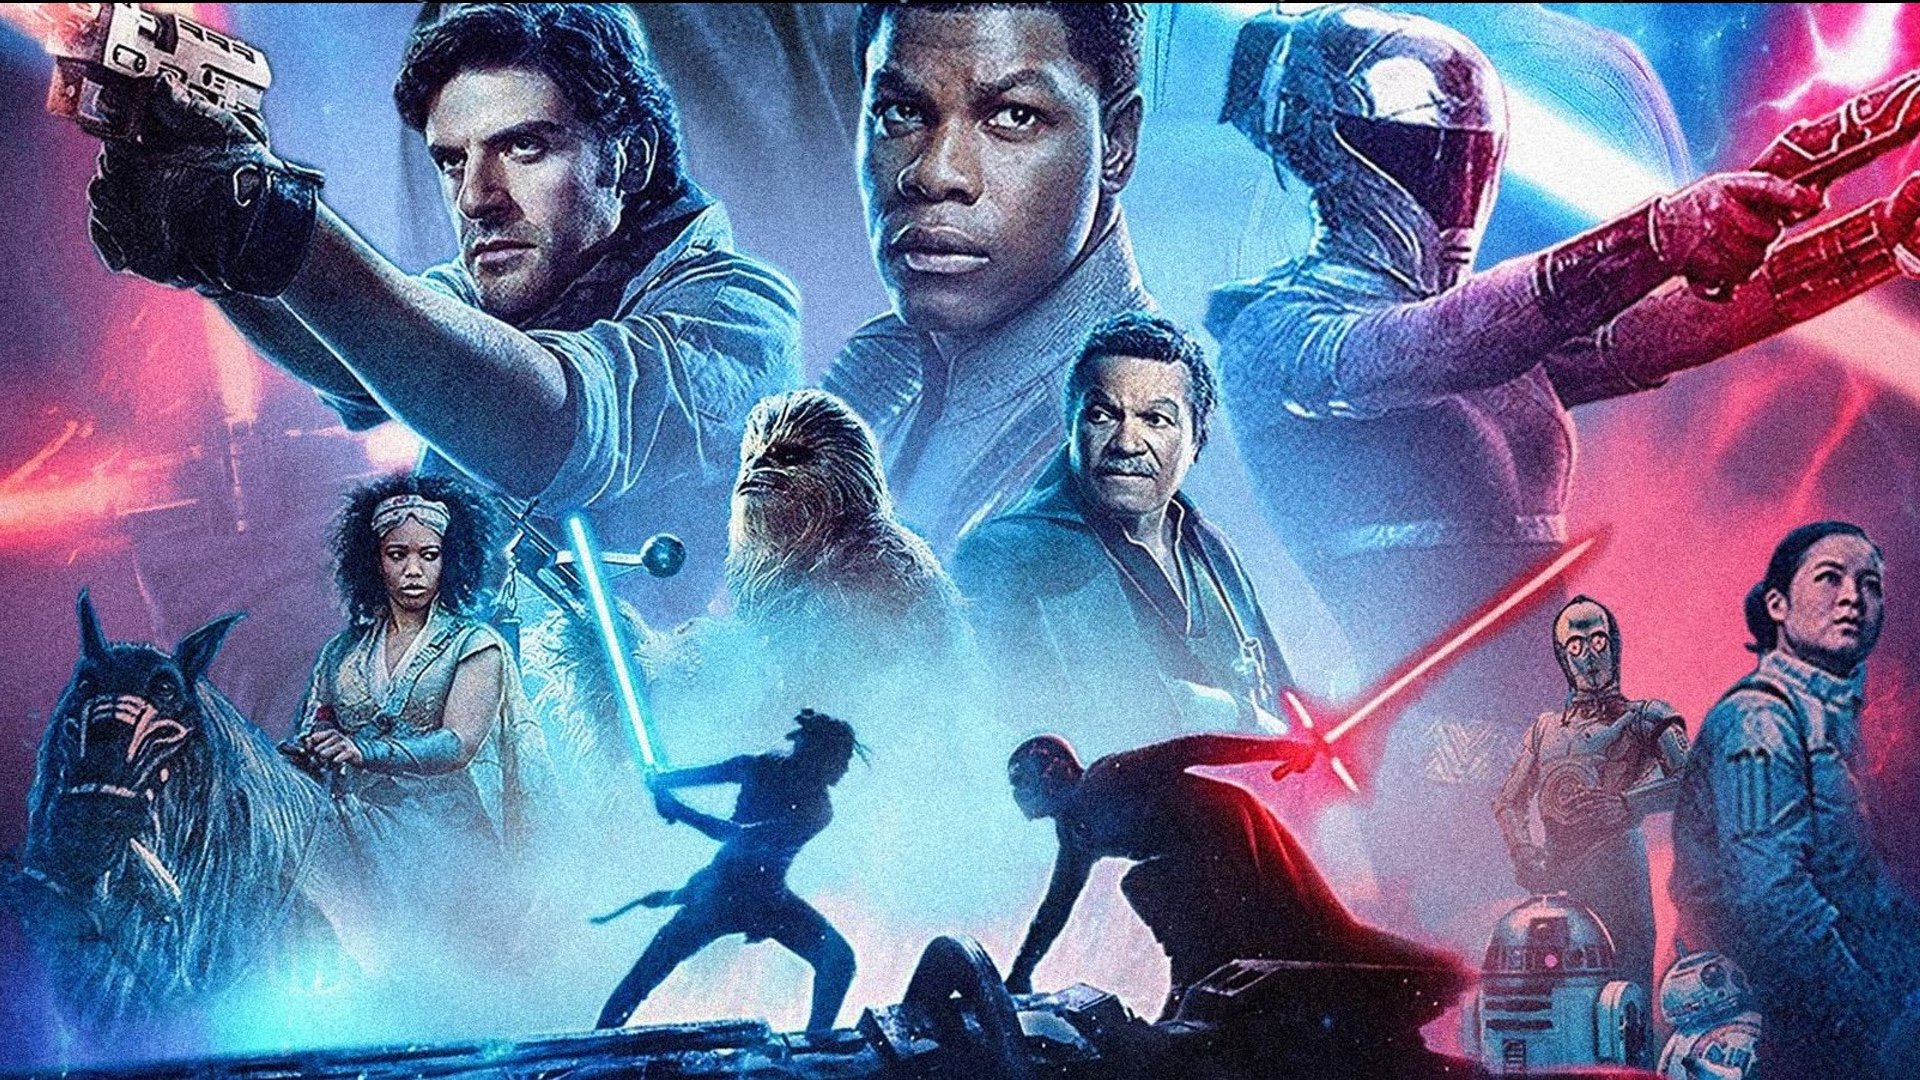 Why Lucasfilm Is So Worried About Star Wars' Next Movie (Report)